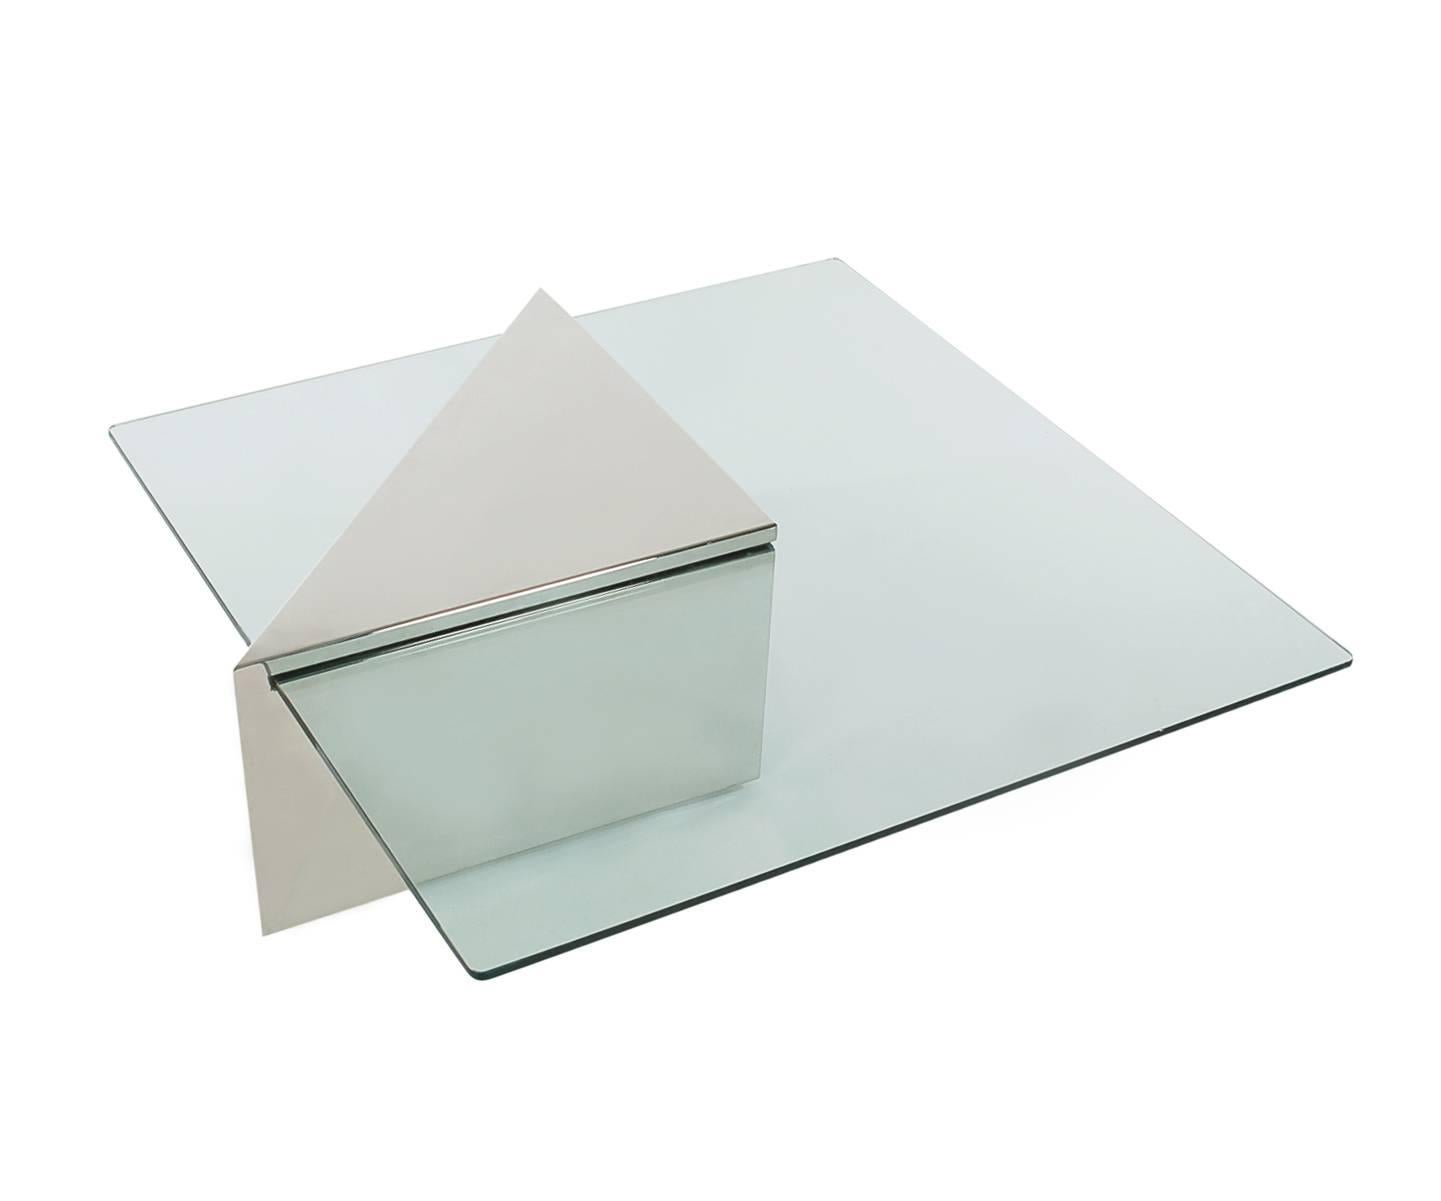 A super classy looking coffee table designed by J. Wade Beam for Brueton furniture company. It consists of an extremely polished stainless steel triangular base that holds a thick piece of floating glass. Two available and priced each.